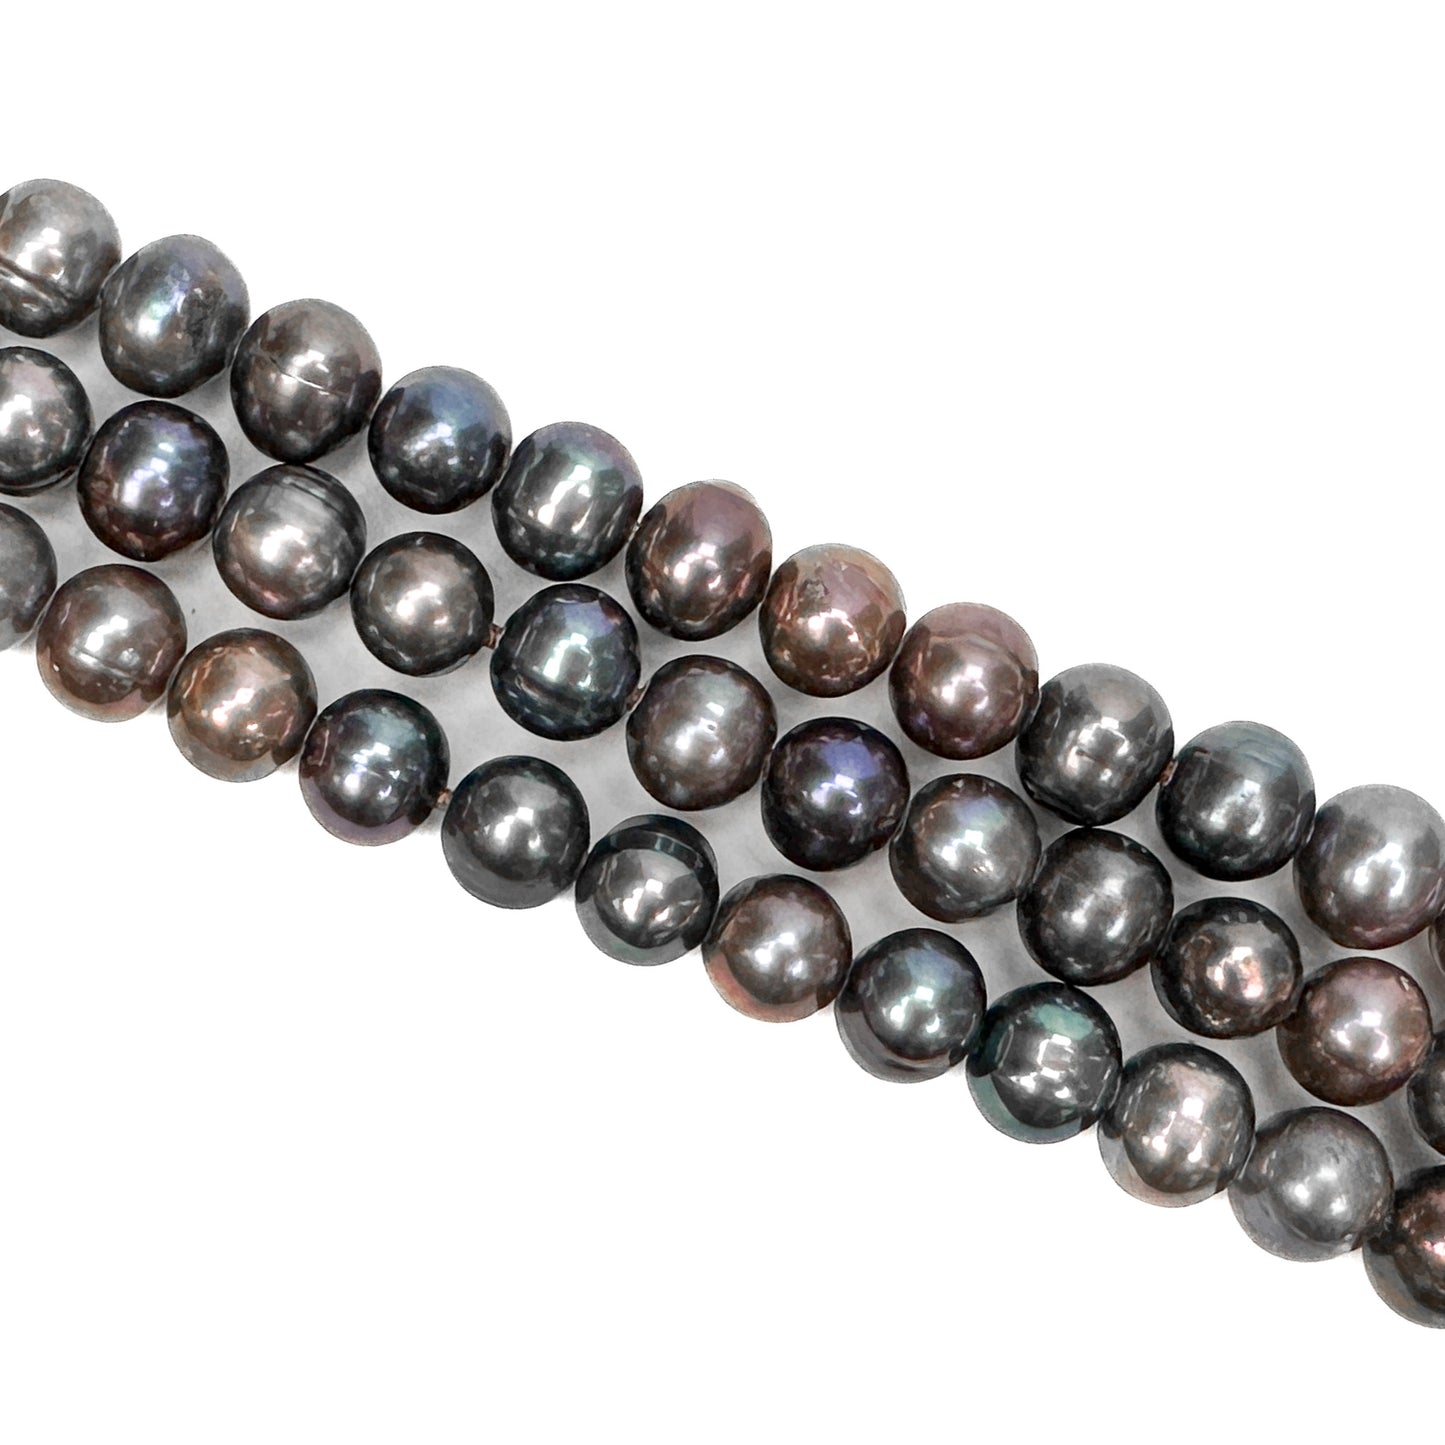 *Medium Peacock 10mm Potato with Large Hole Freshwater Pearl Bead (3 Quantities Available)-The Bead Gallery Honolulu